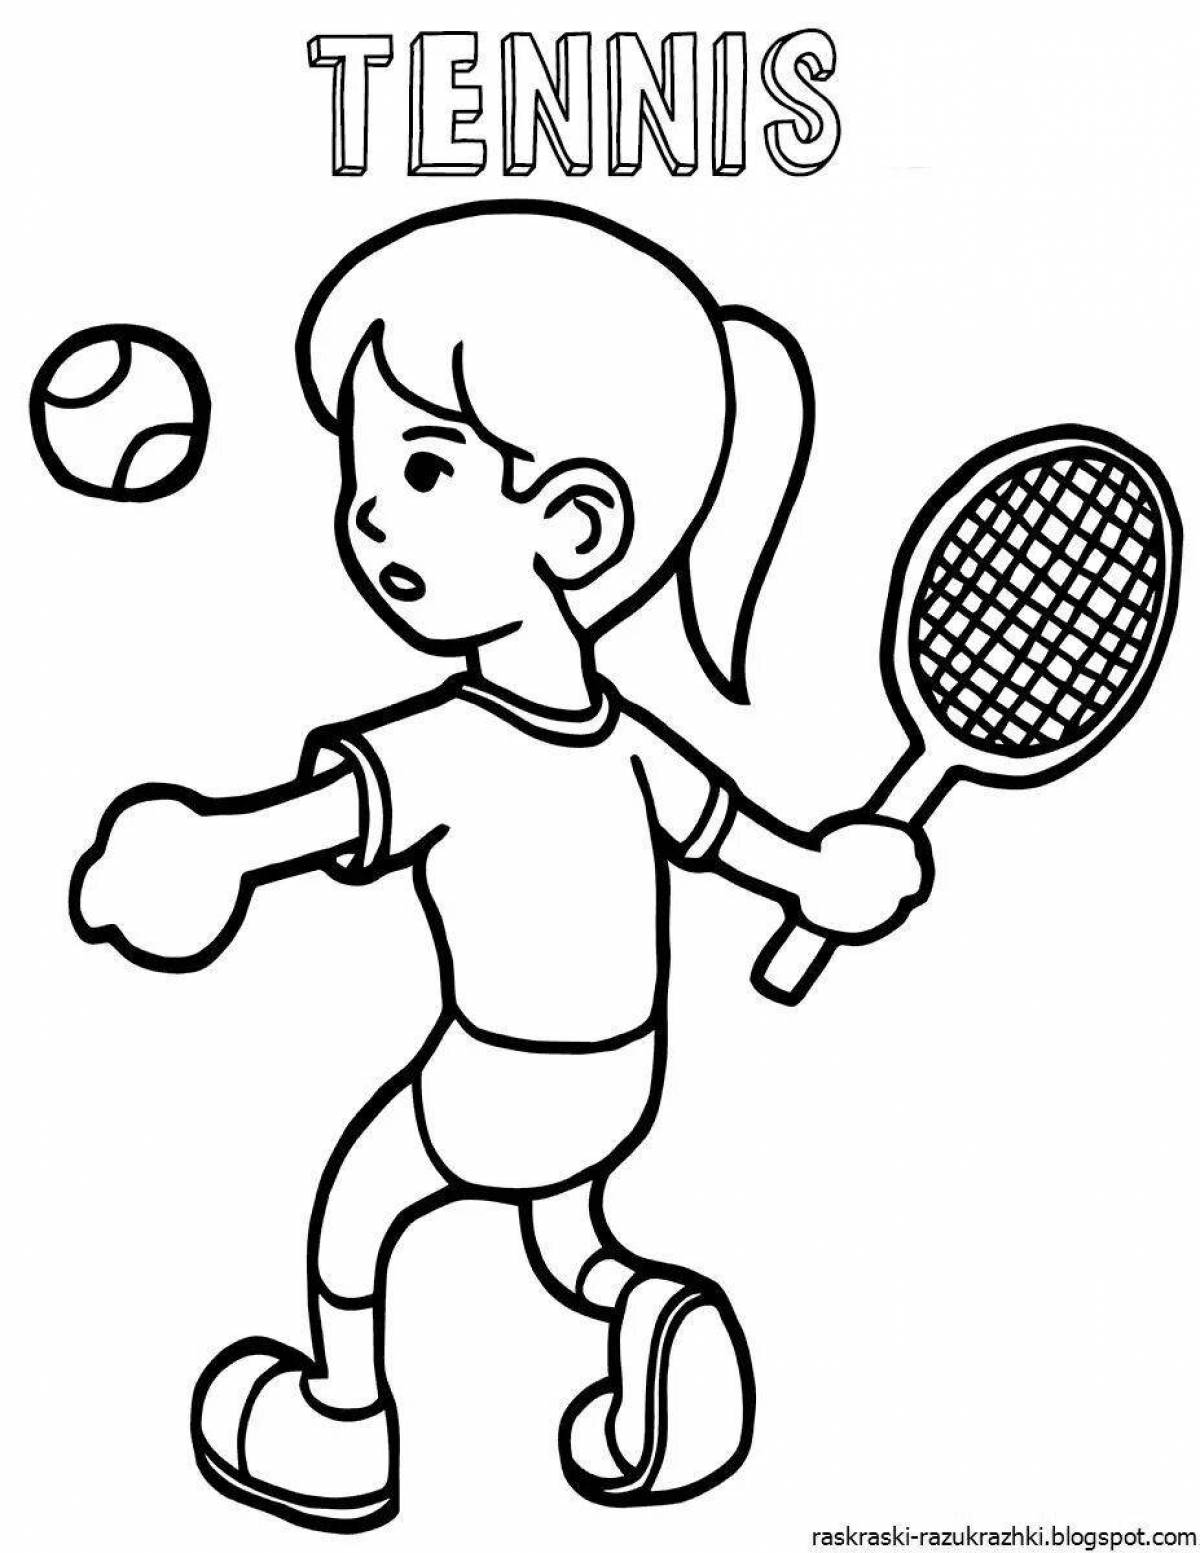 Fun sports coloring book for 4-5 year olds